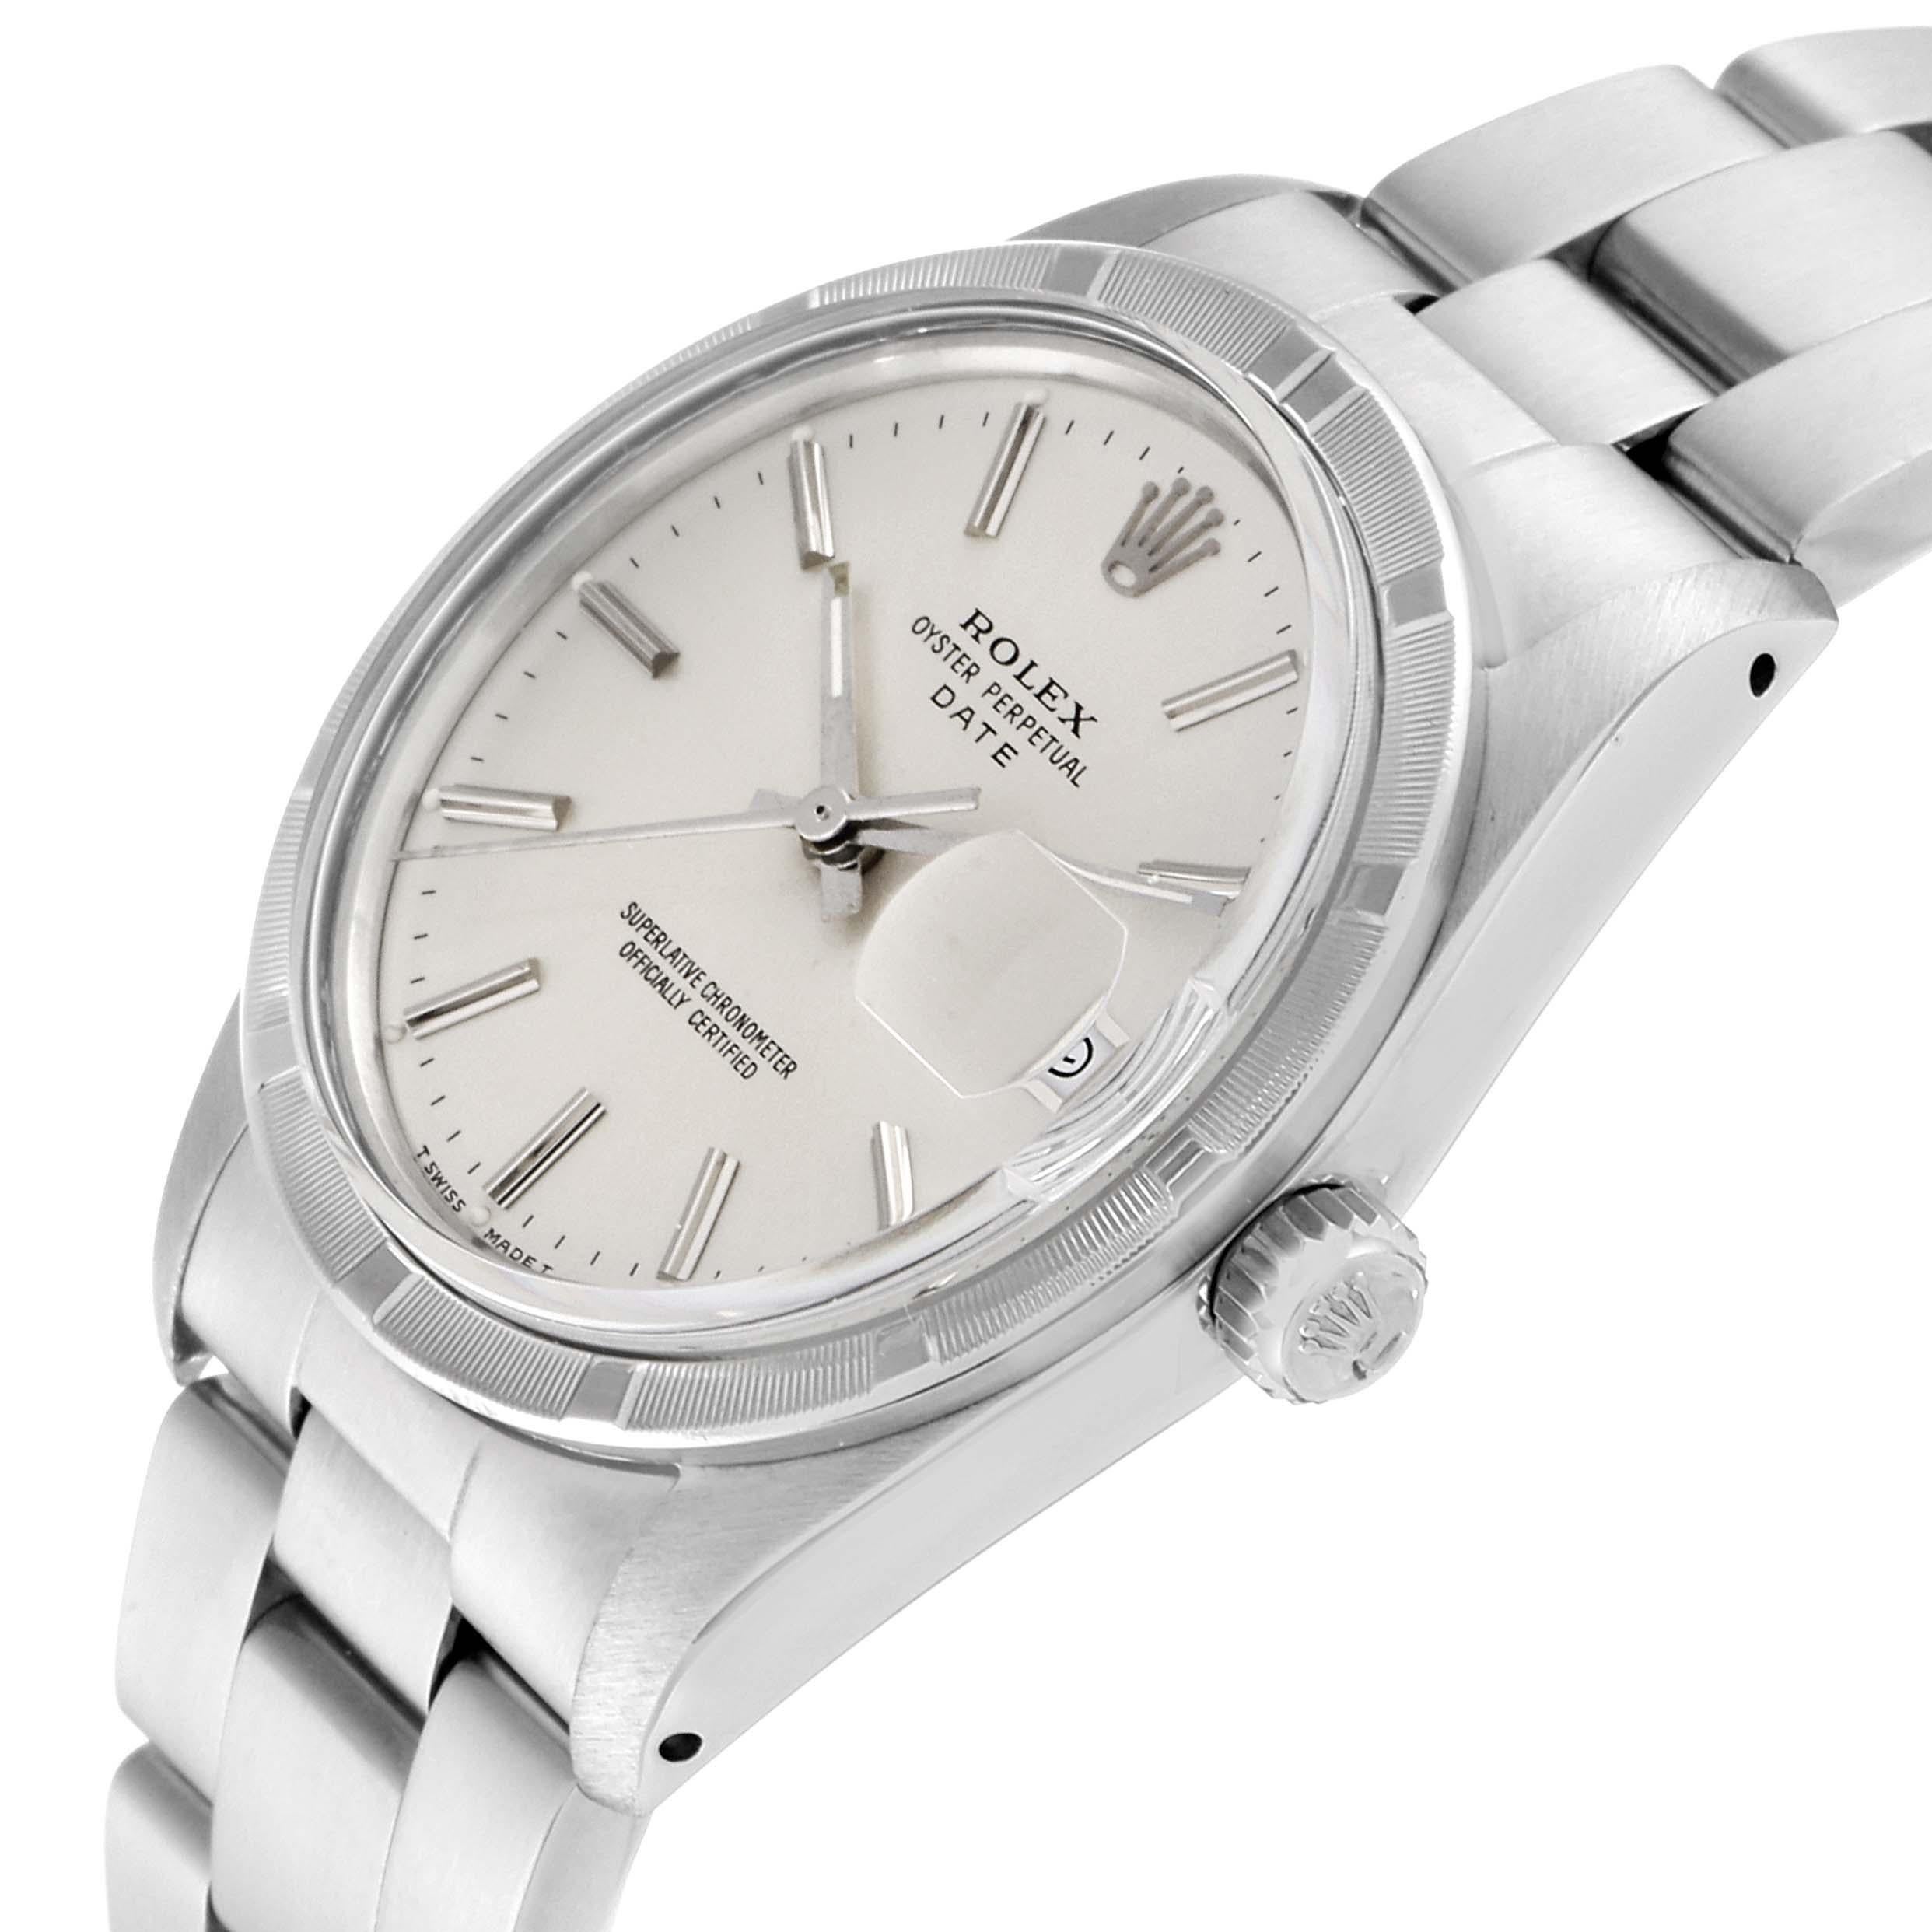 Rolex Date Stainless Steel Silver Dial Vintage Men's Watch 15010 2